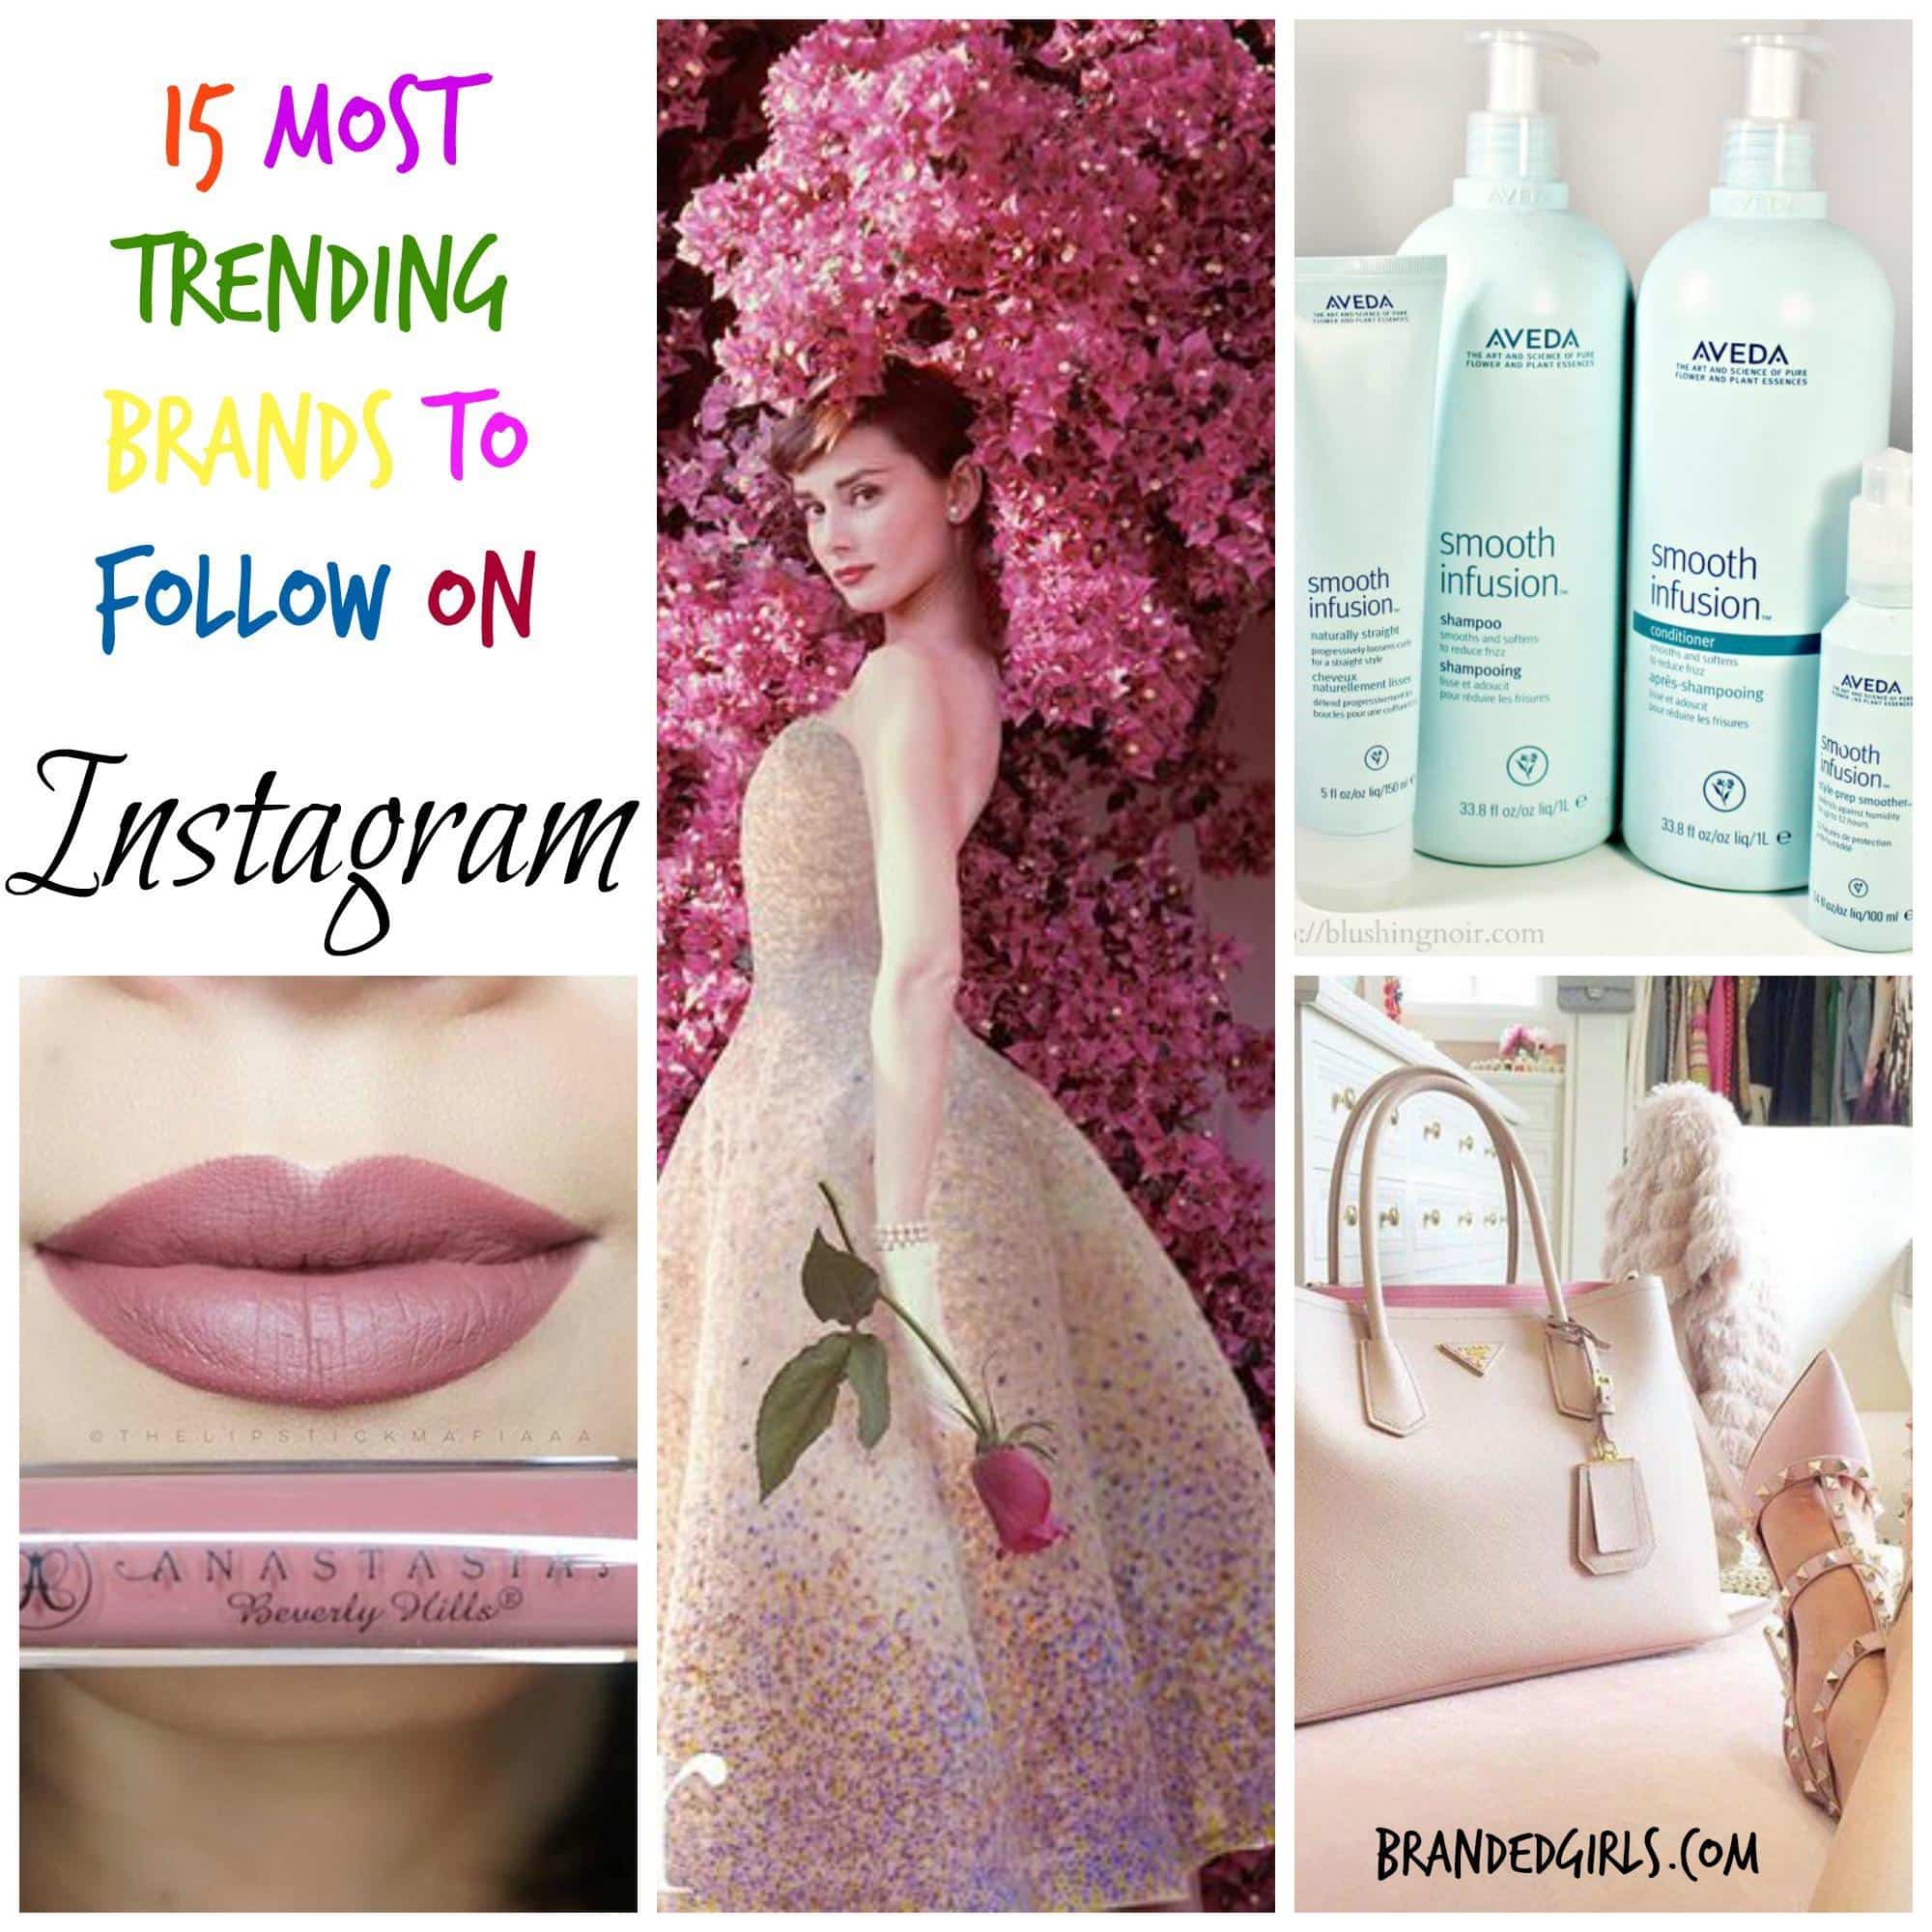 Top 15 Brands for Women To Follow On Instagram for Styling Tips